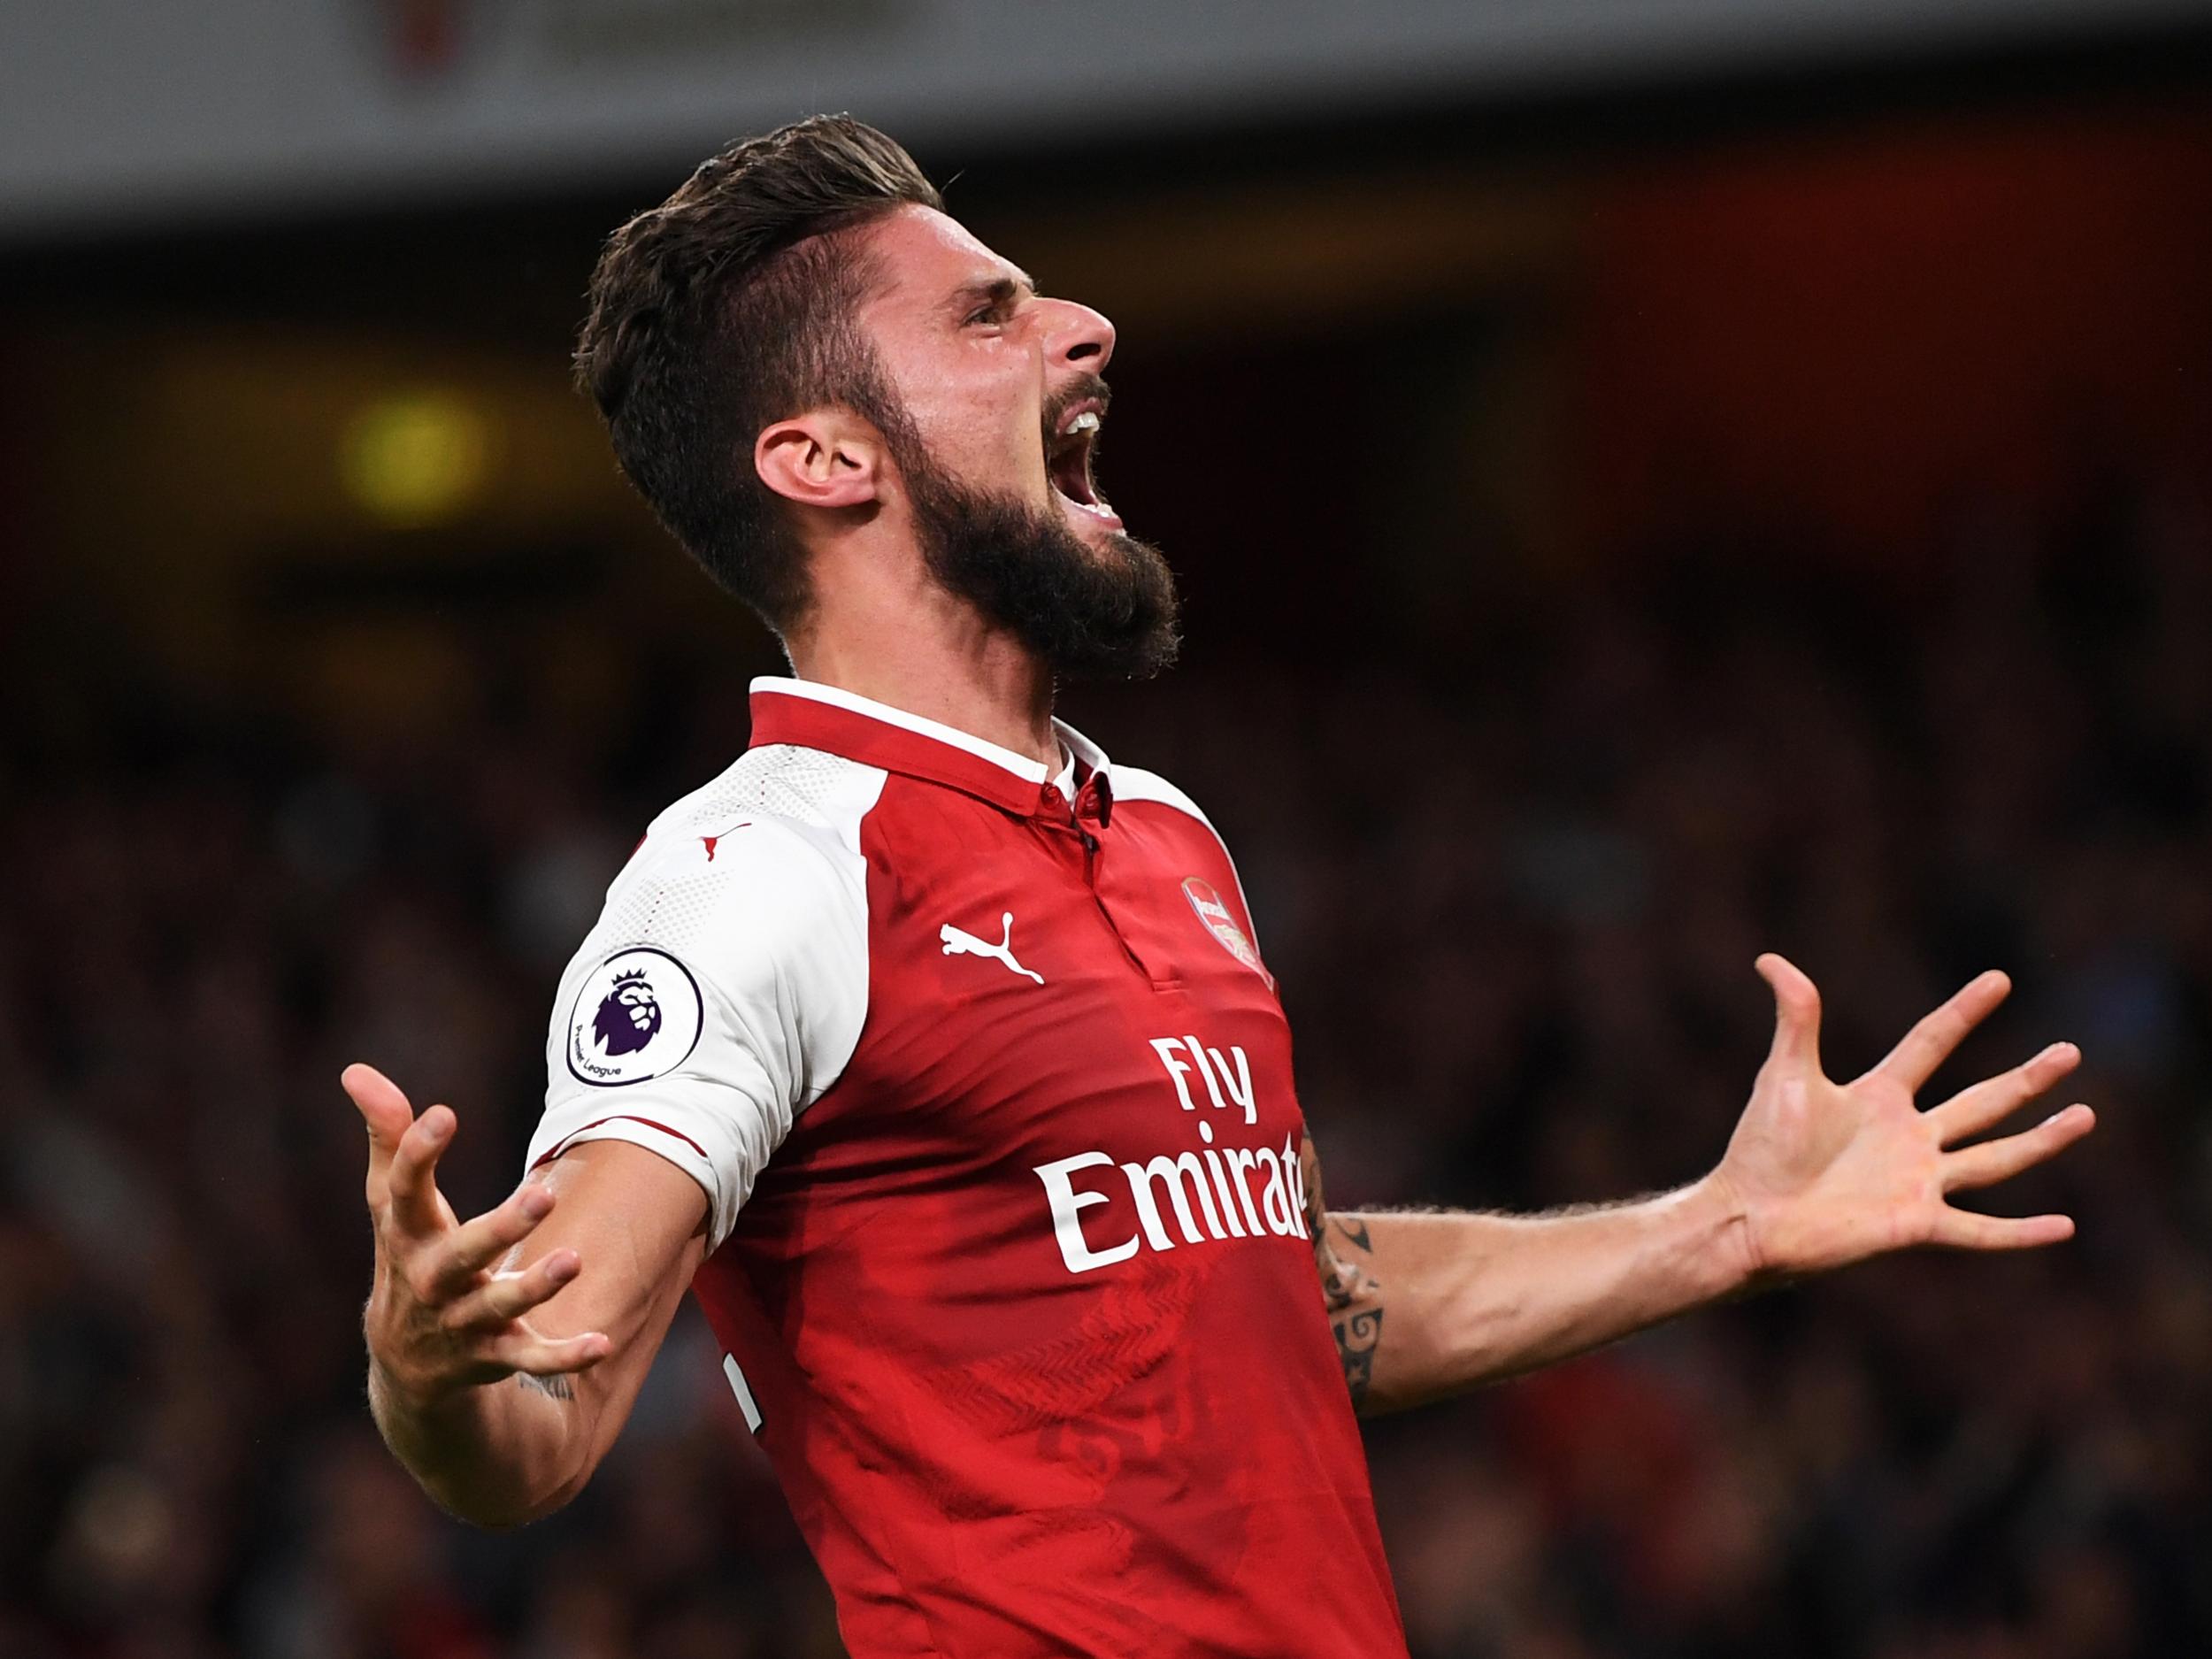 Most of Olivier Giroud's Premier League appearances this season have come from off the bench